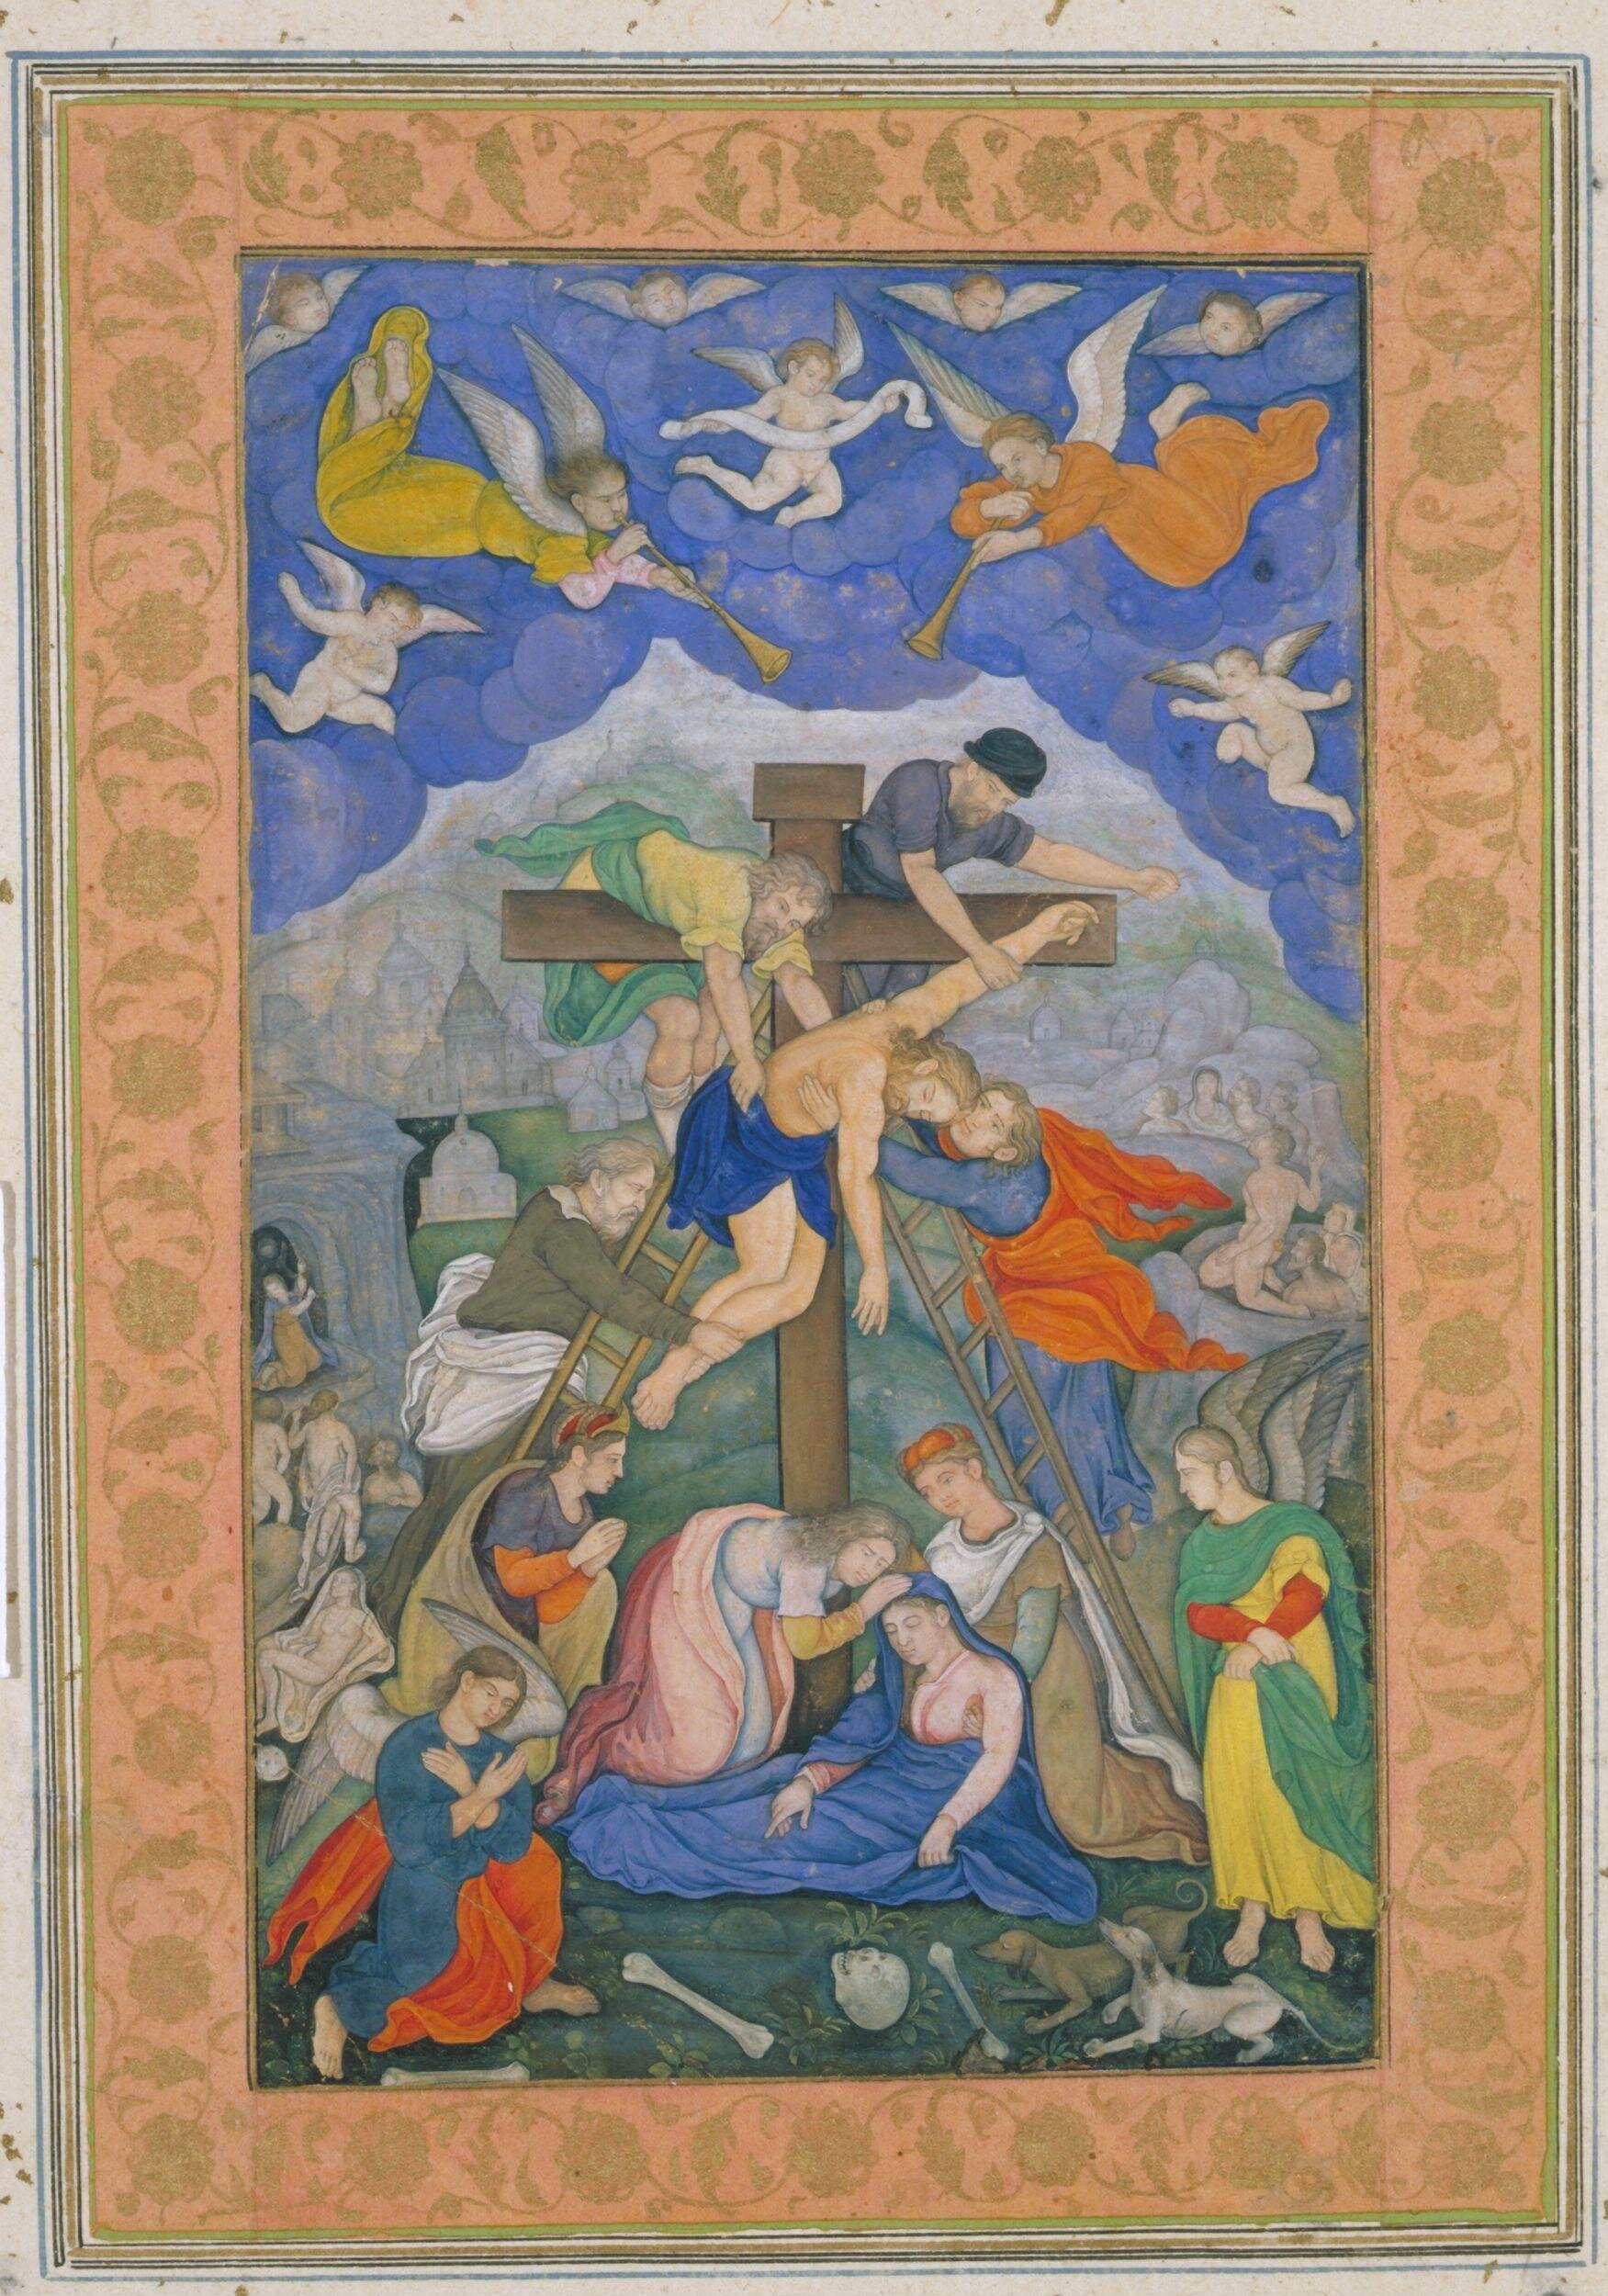 an intricate gouche painting of the destruction of the